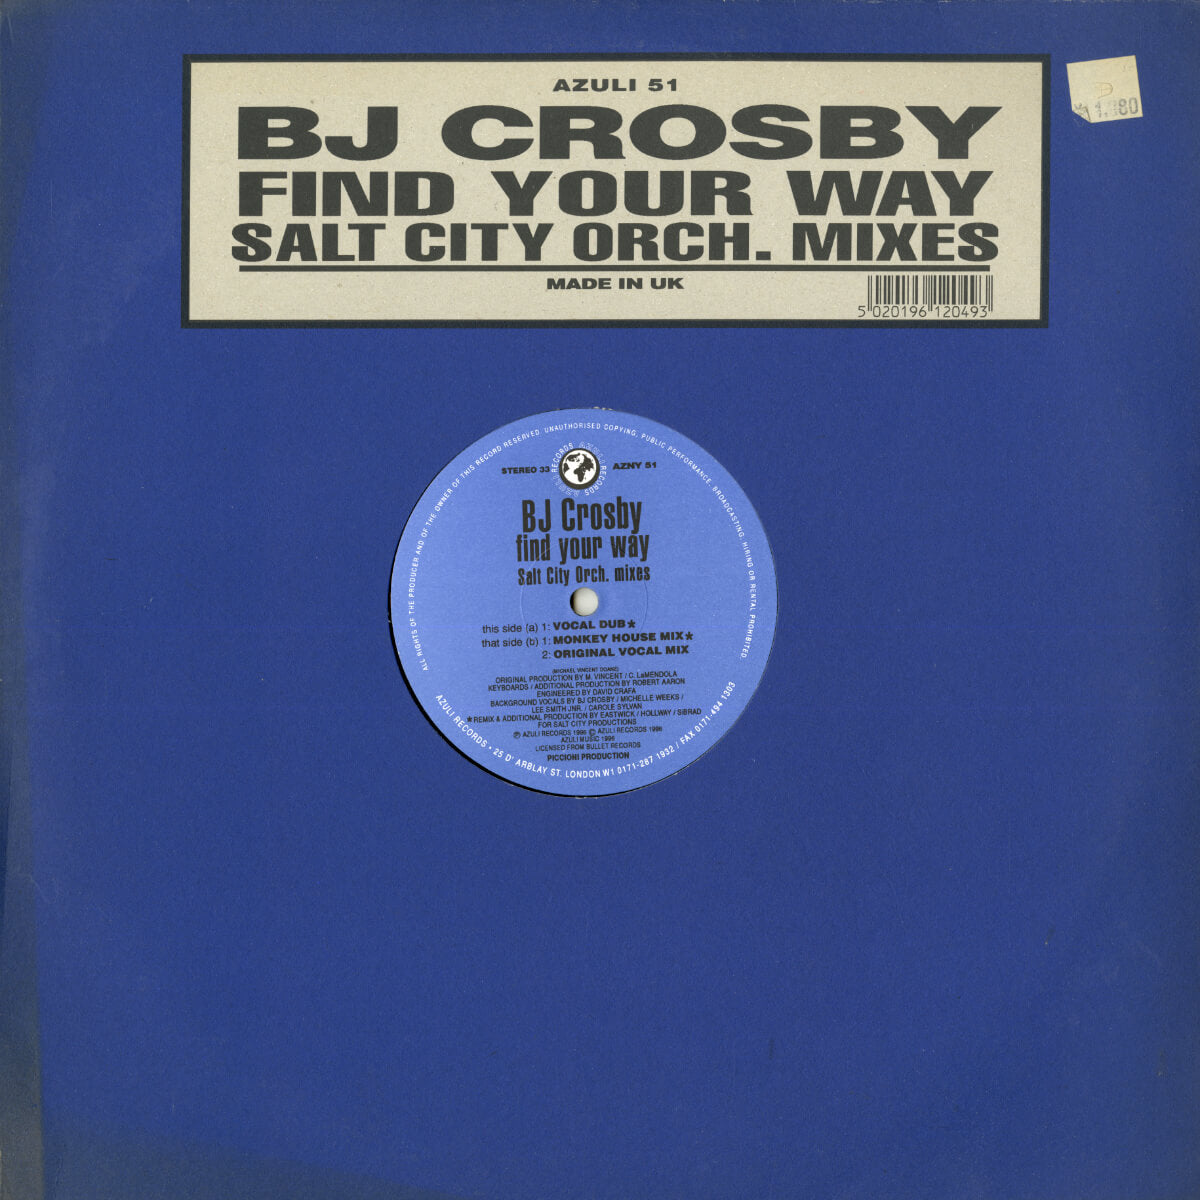 BJ Crosby – Find Your Way (Salt City Orch. Mixes)